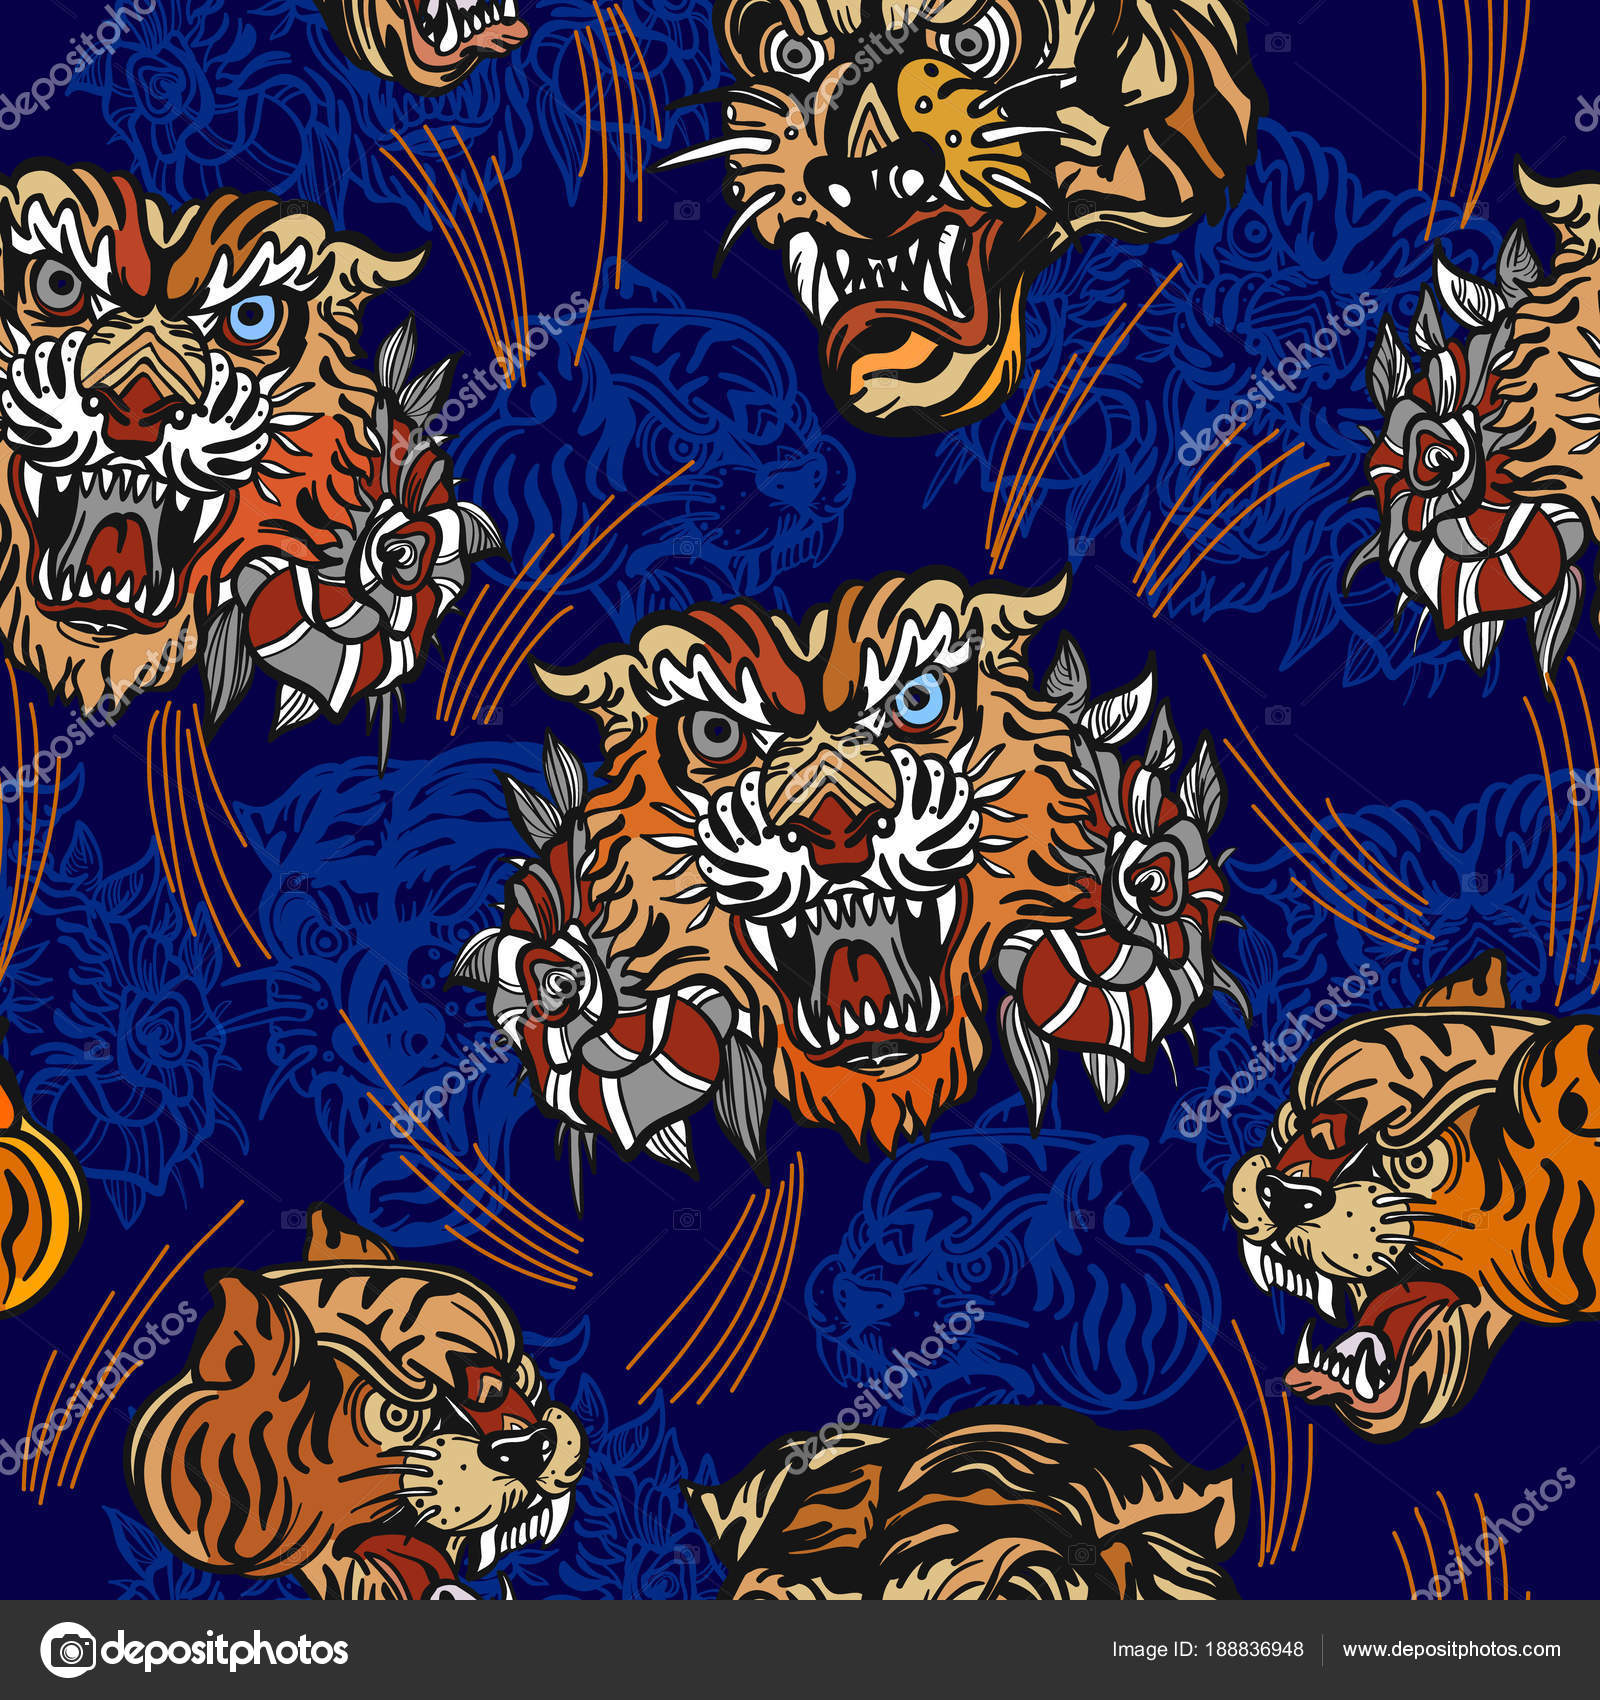 Sold at Auction: VINTAGE TIGER TATTOO FLASH